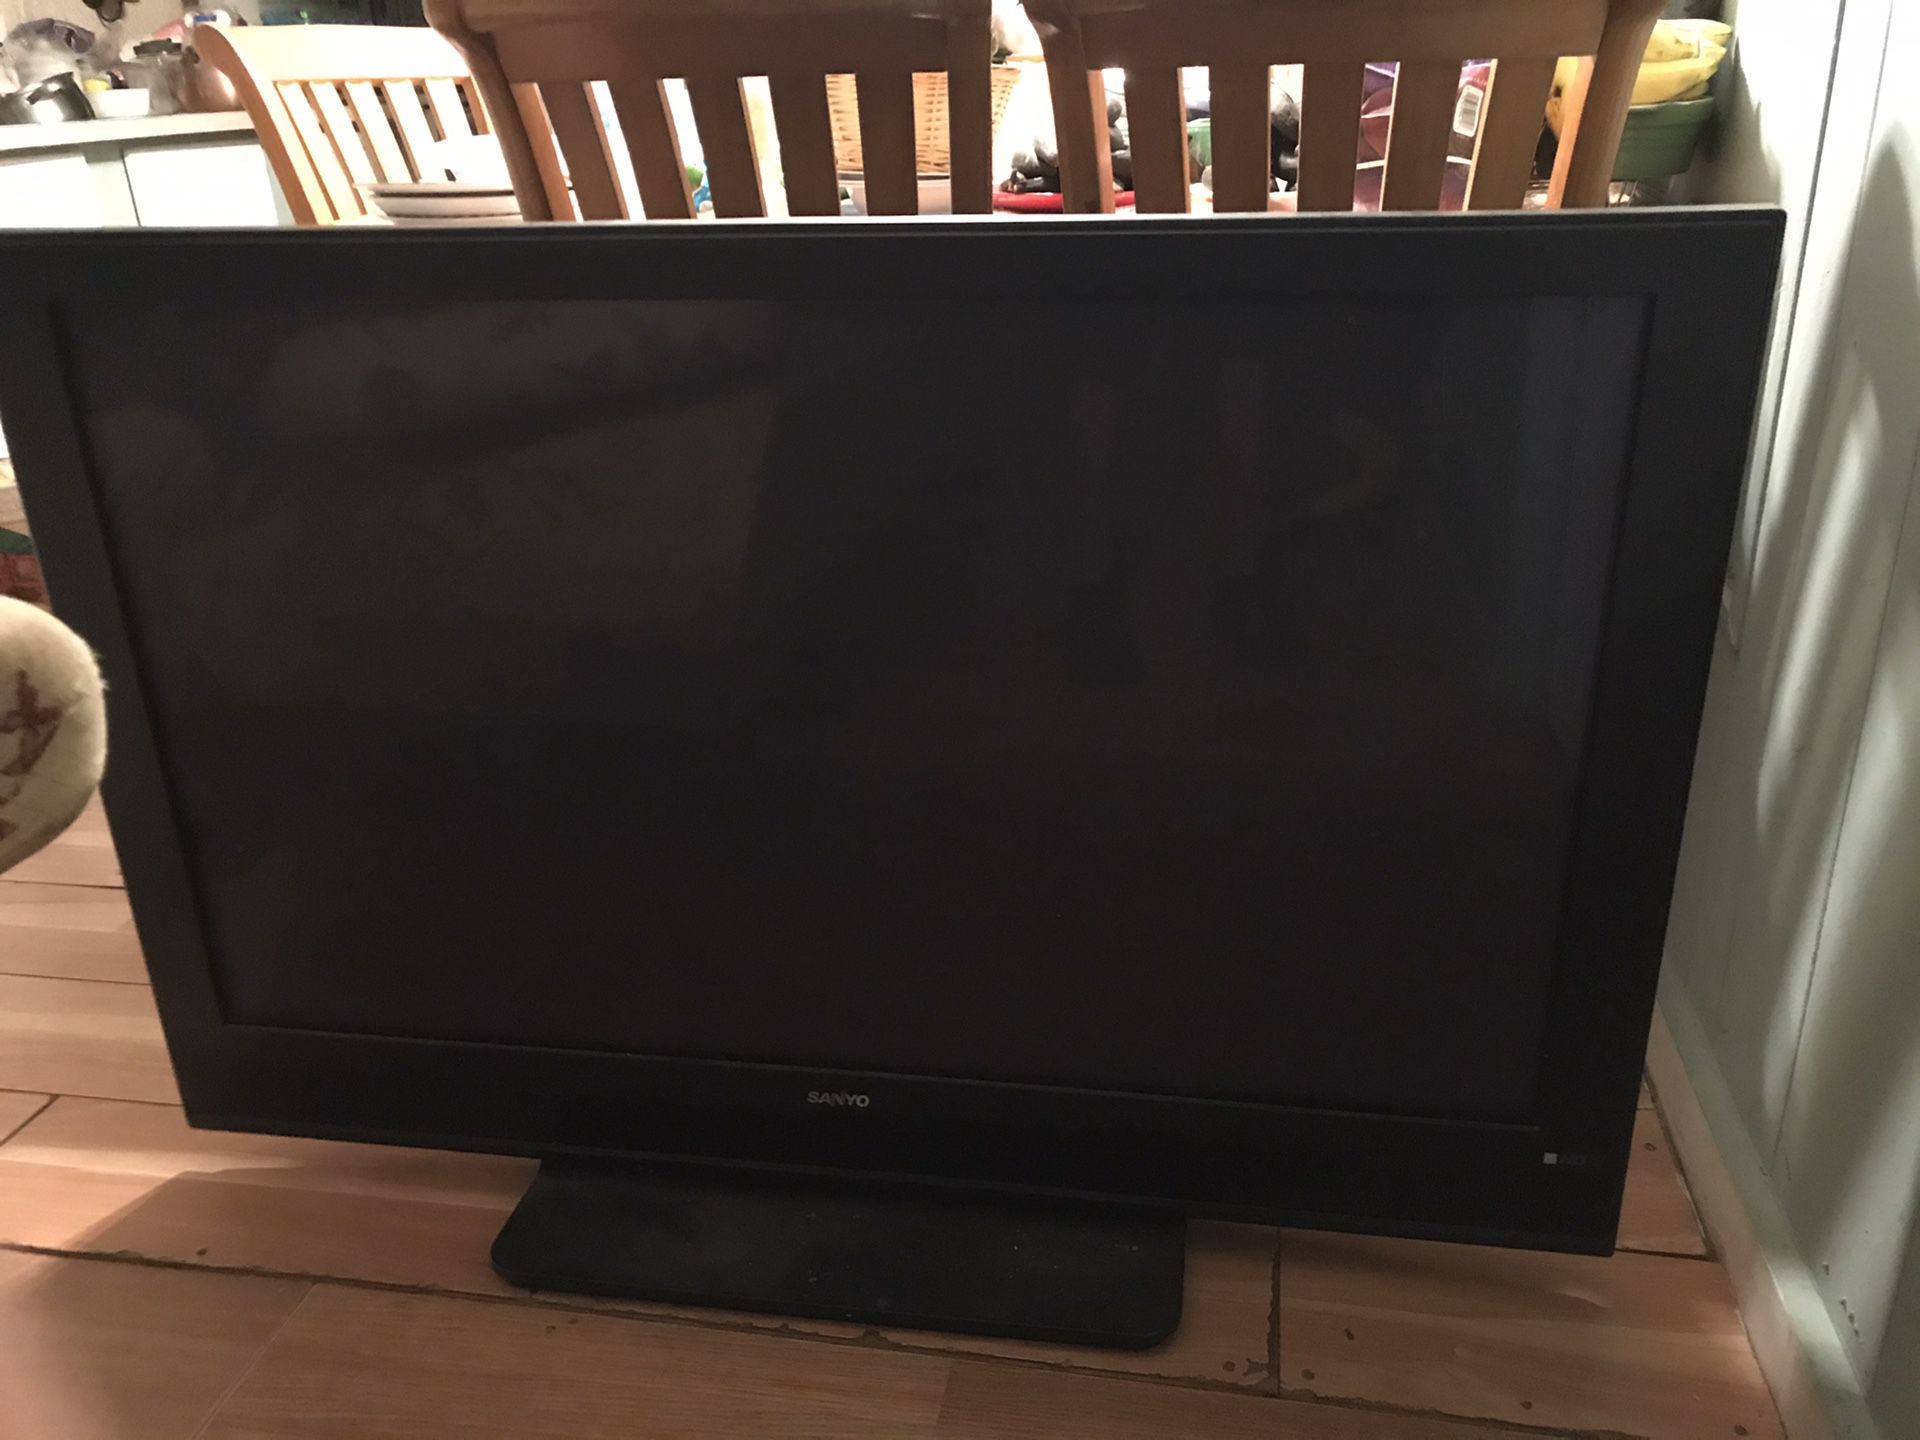 SANYO TV FLAT SCREEN (look at the discription)NOT REALLY A DOLLAR JUST LMK YOUR OFFER